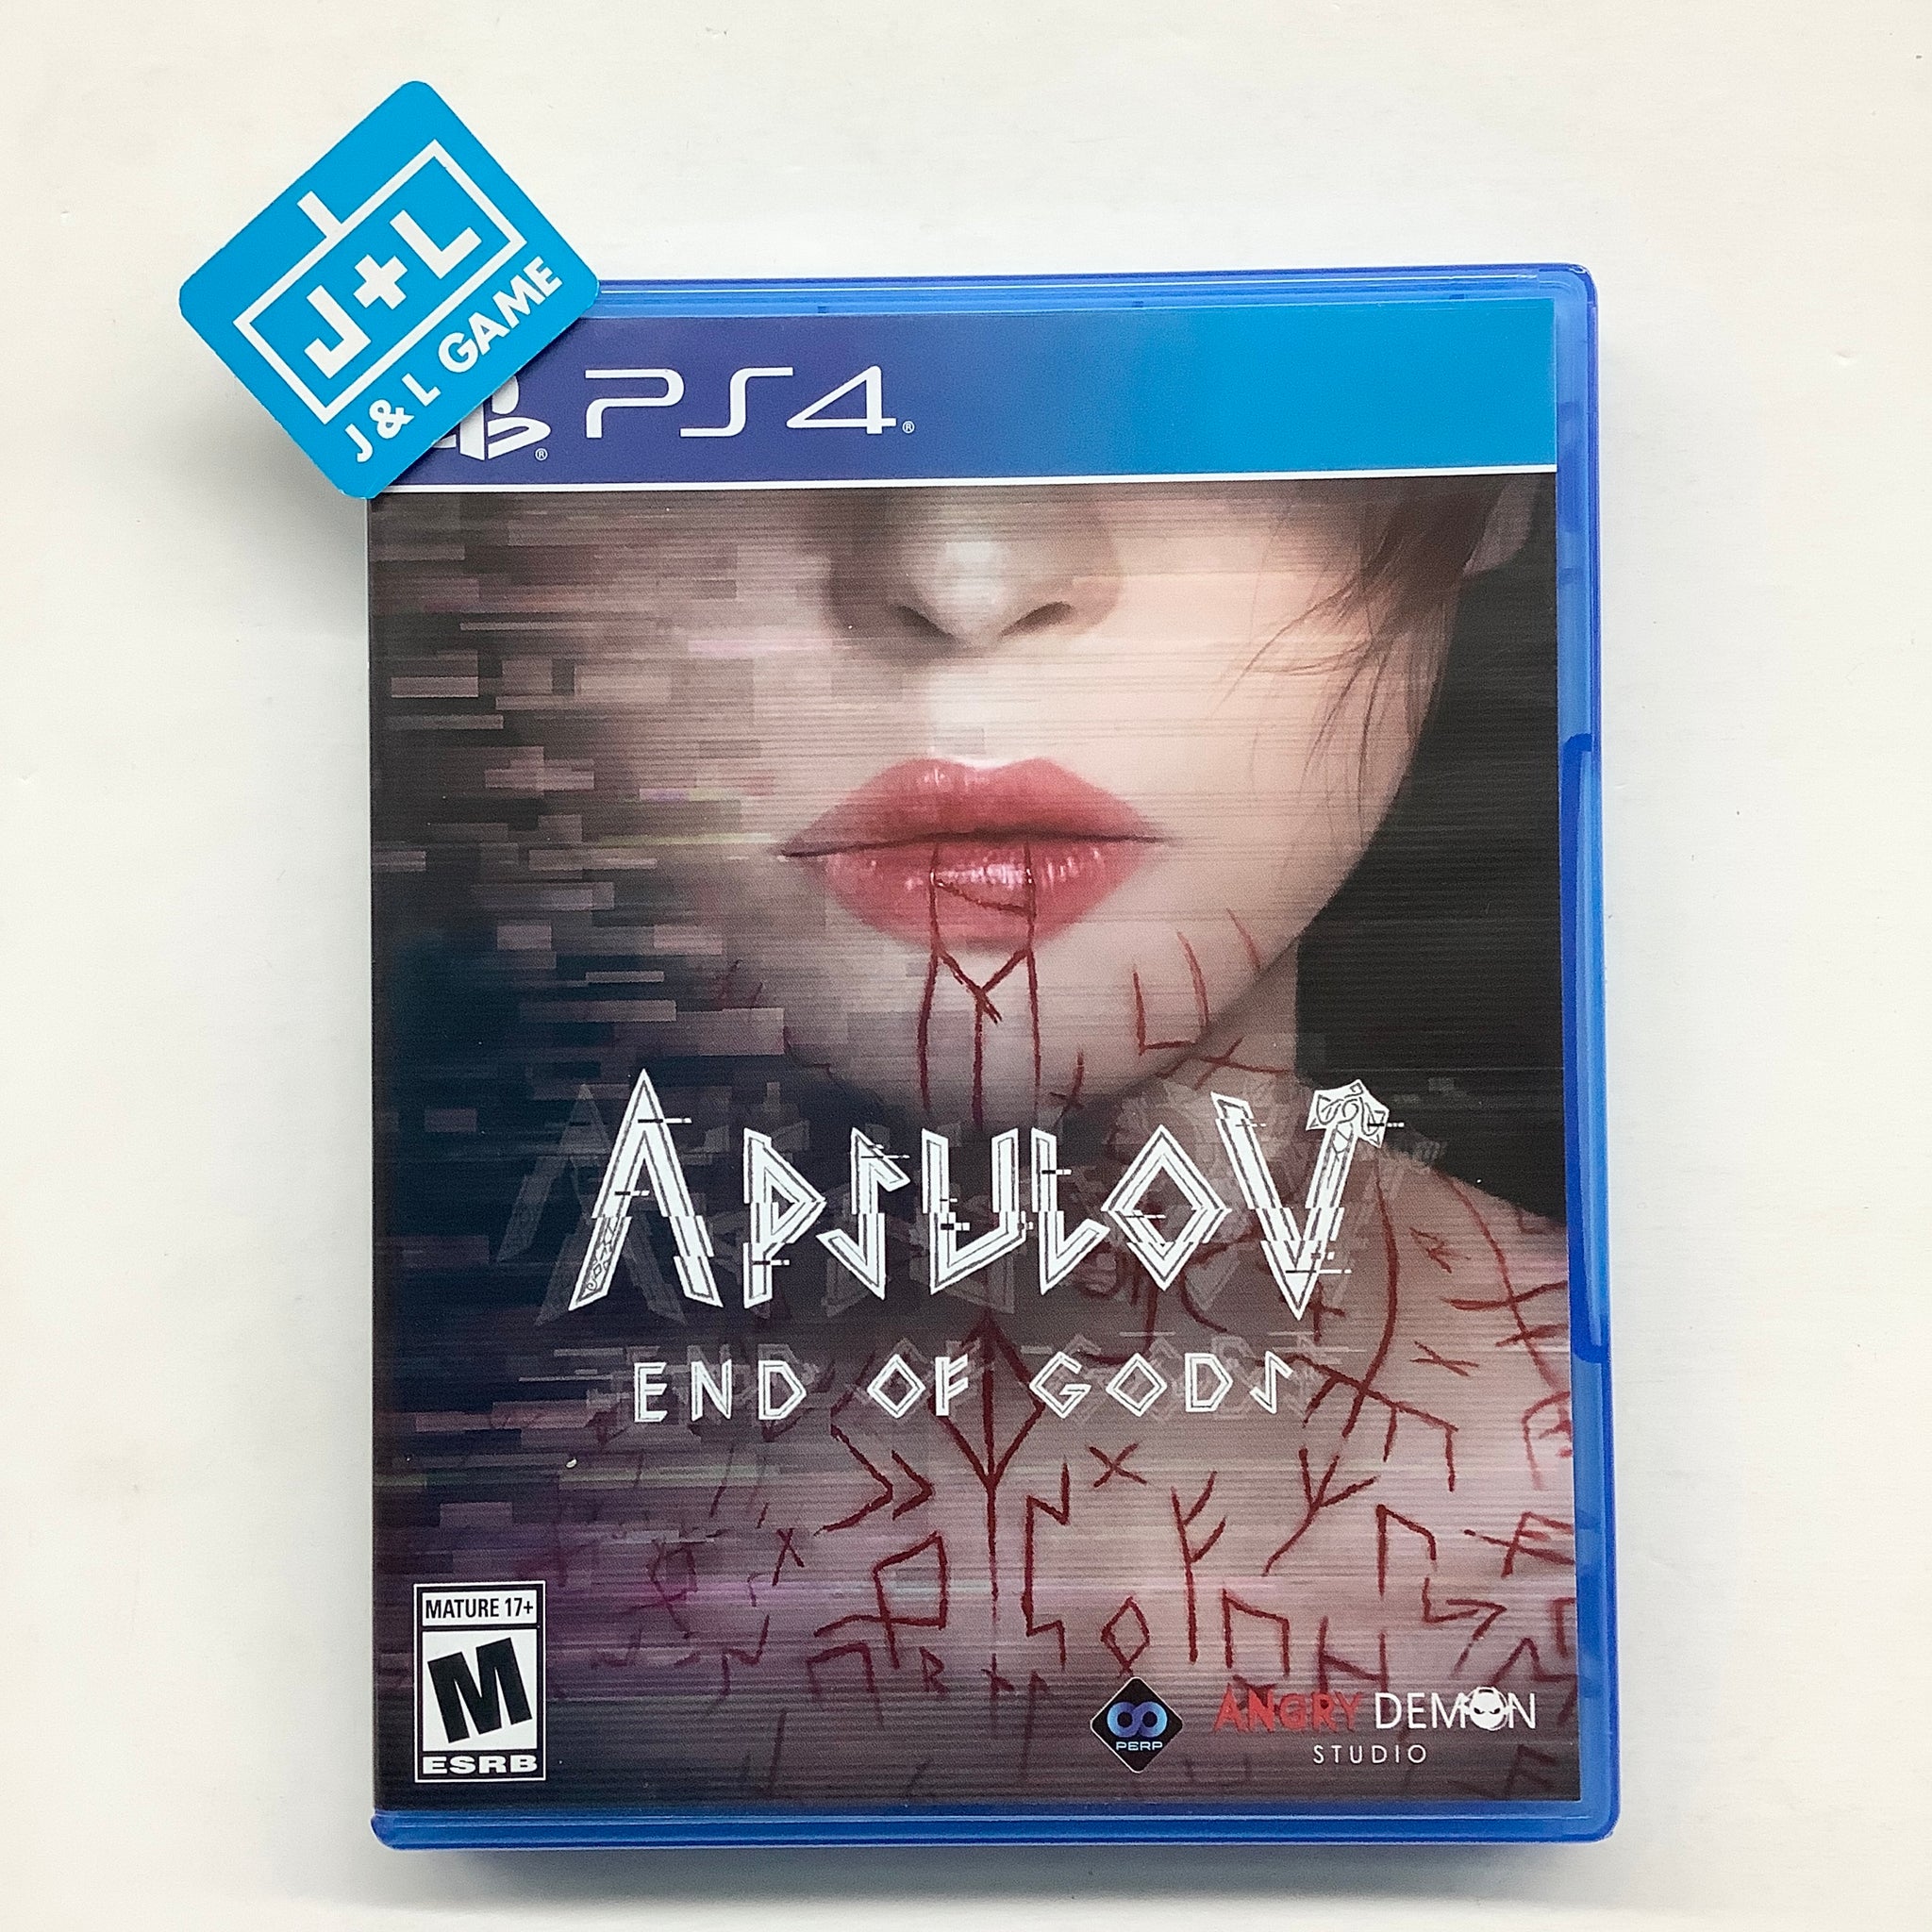 Apsulov: End of Gods - (PS4) PlayStation 4 [UNBOXING] Video Games Perpetual   